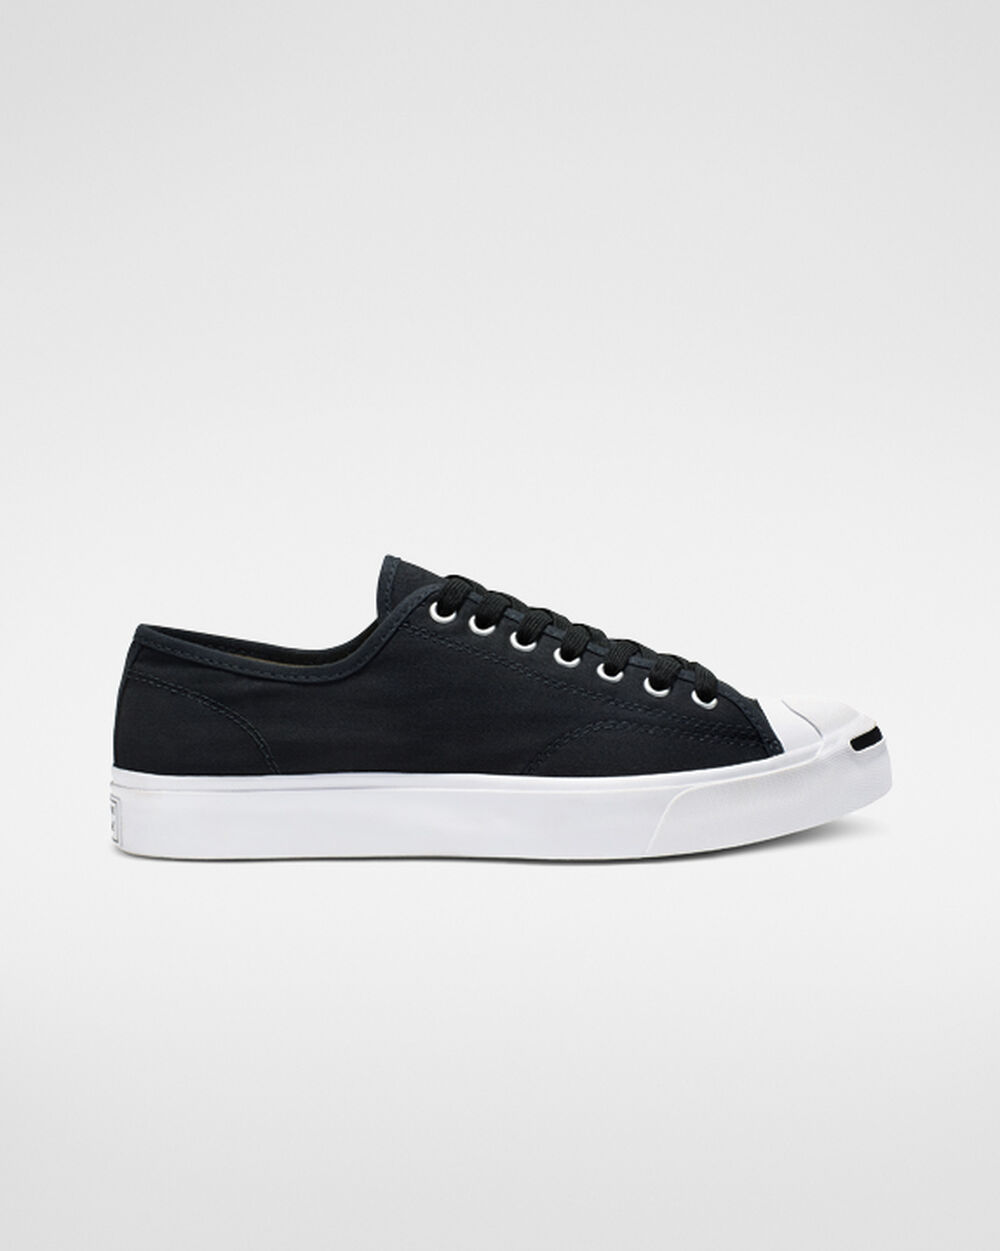 Tenis Converse Jack Purcell Mujer Negros Blancos Negros | Mexico-21066